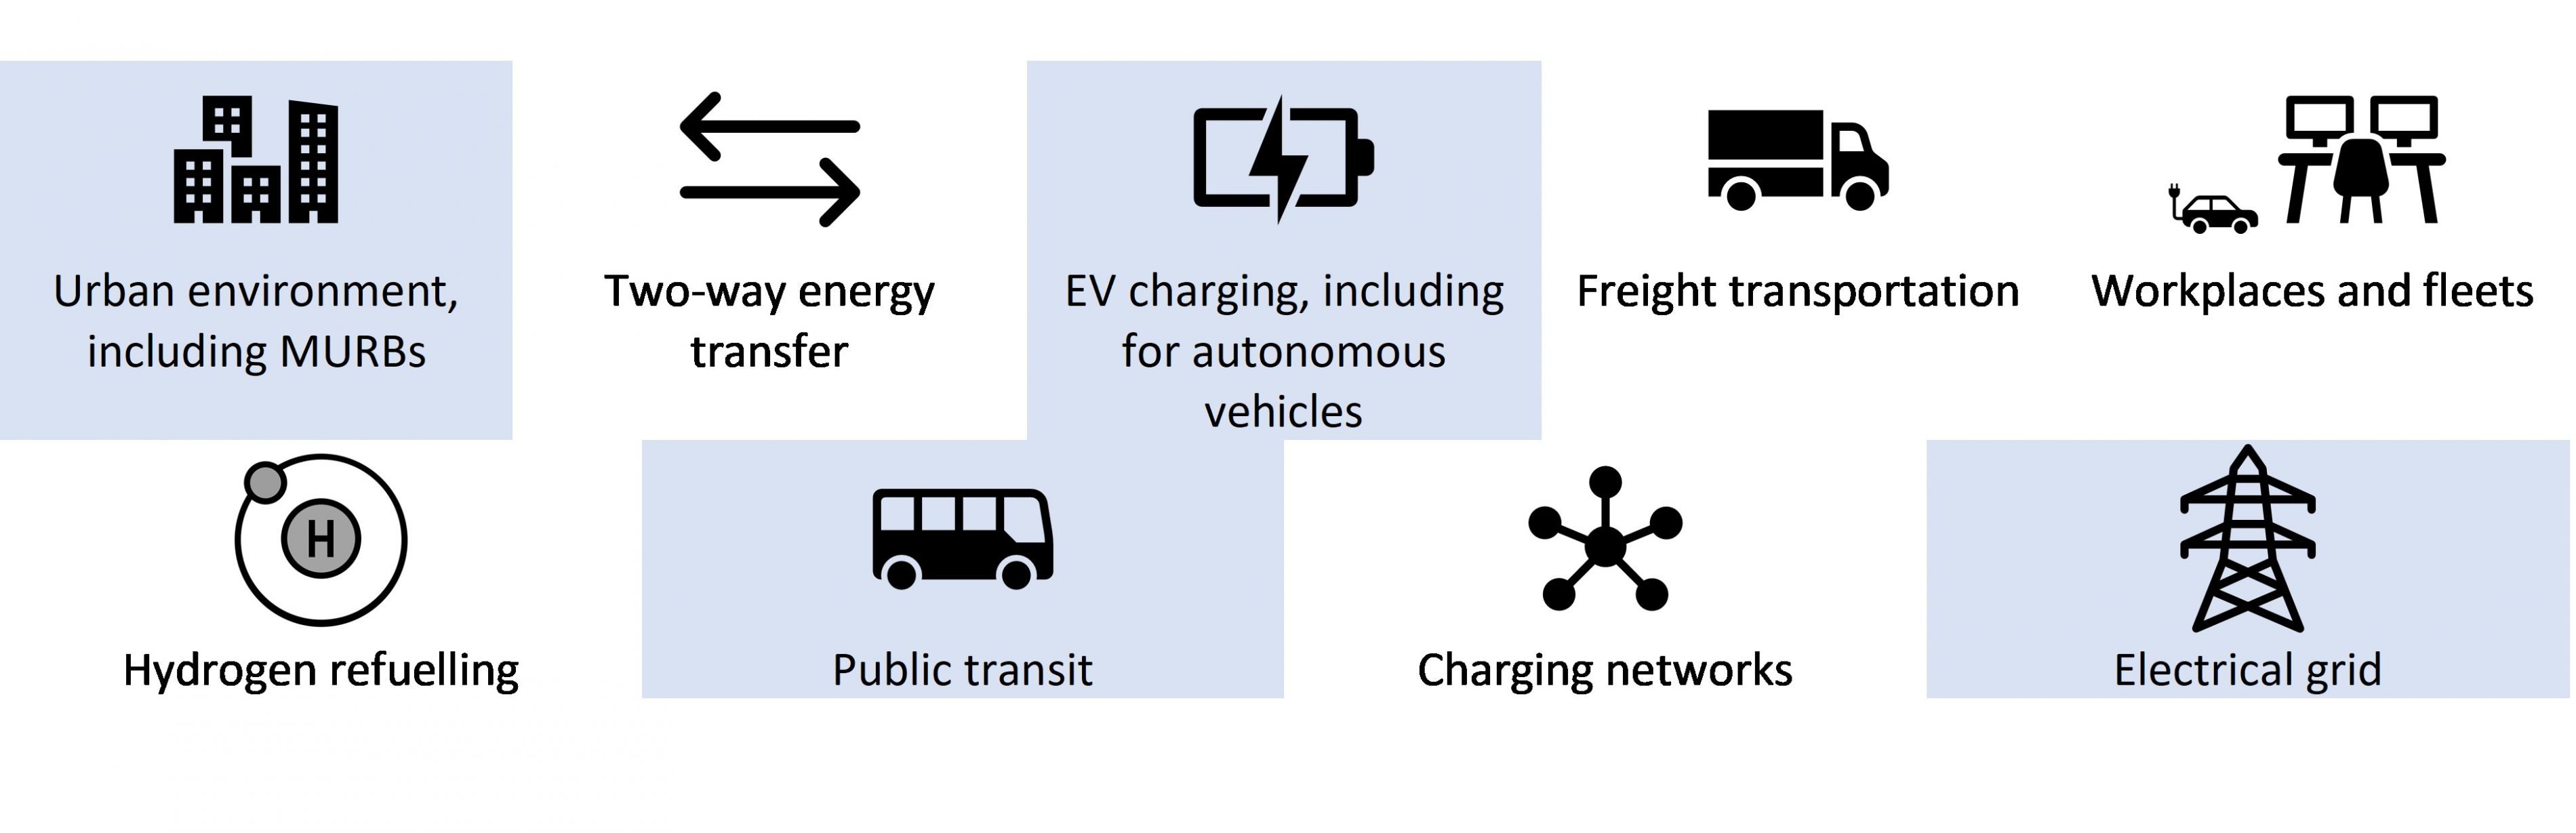 E-Mobility: DKV Mobility expands charging network with AVIA charge points